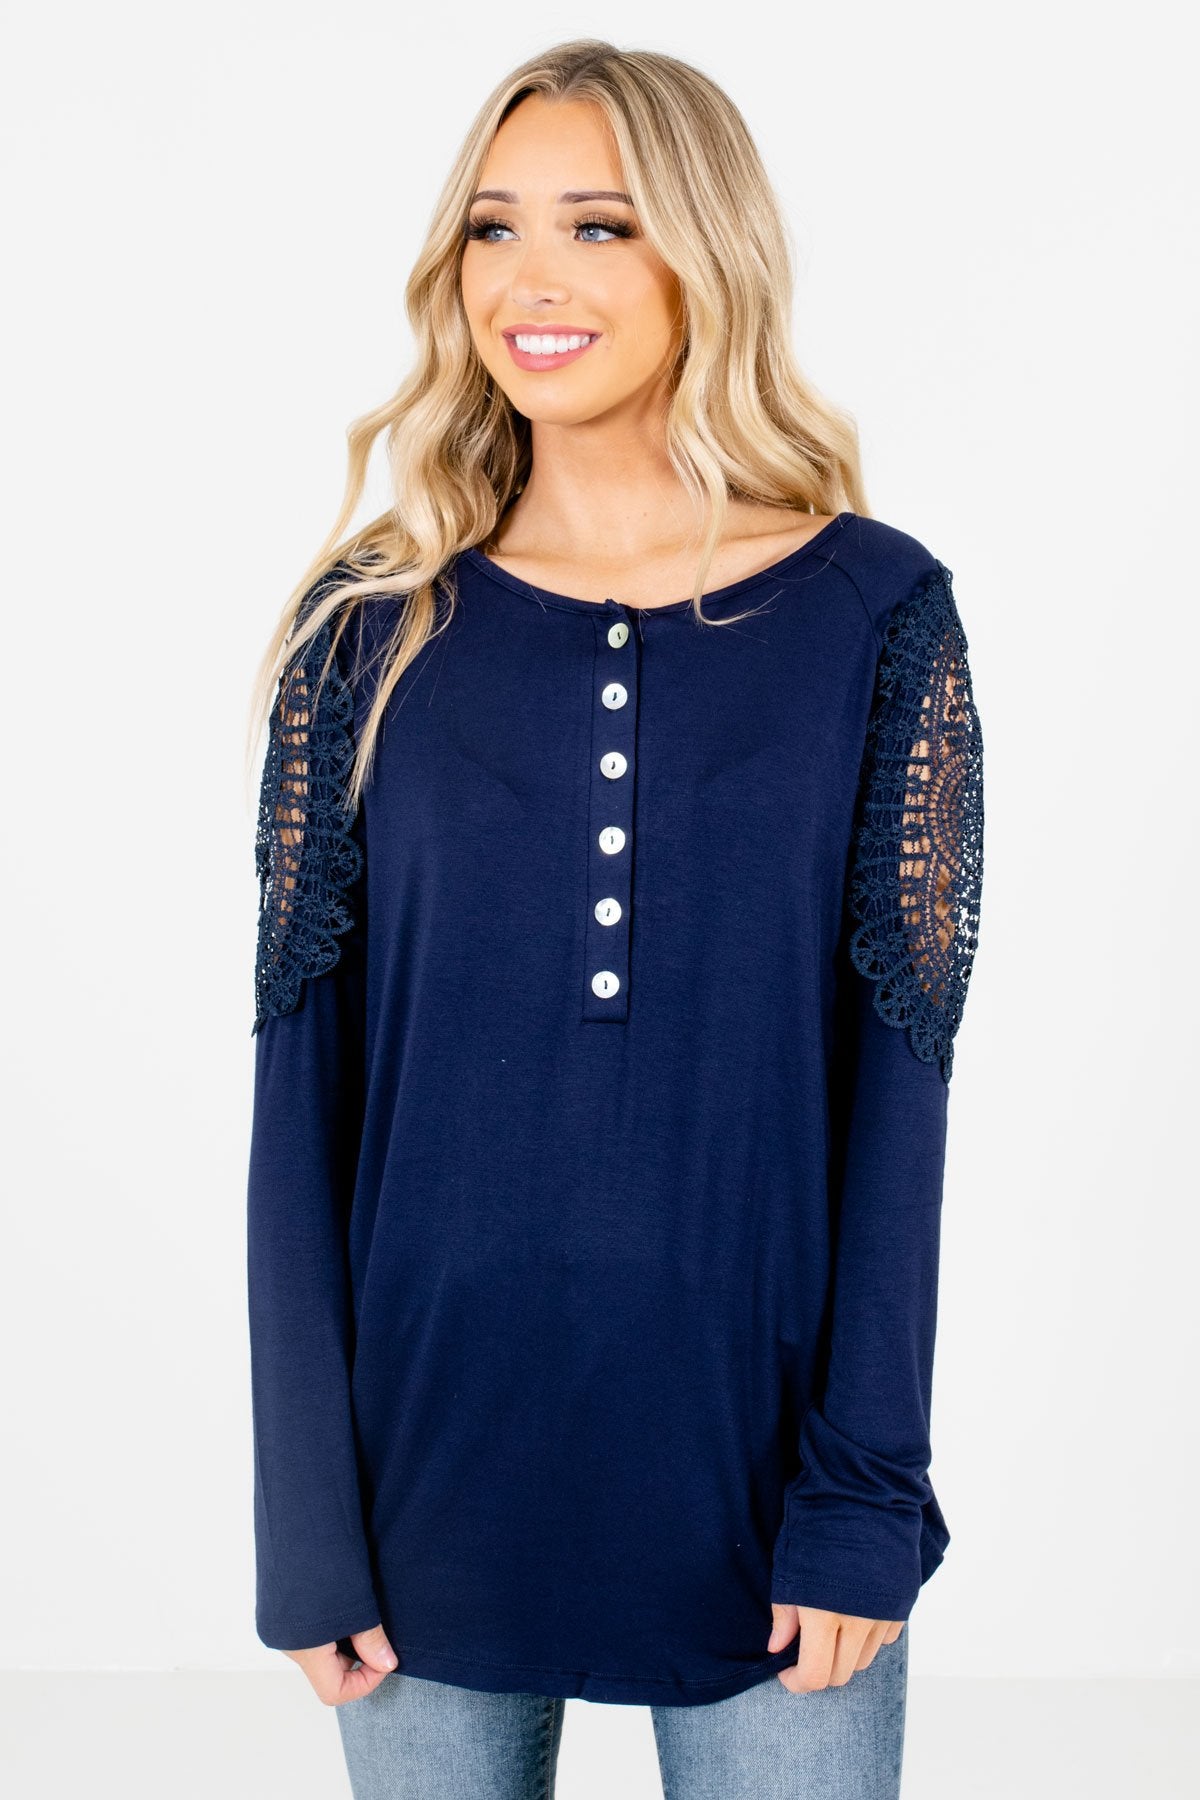 Navy High-Low Hem Boutique Tops for Women